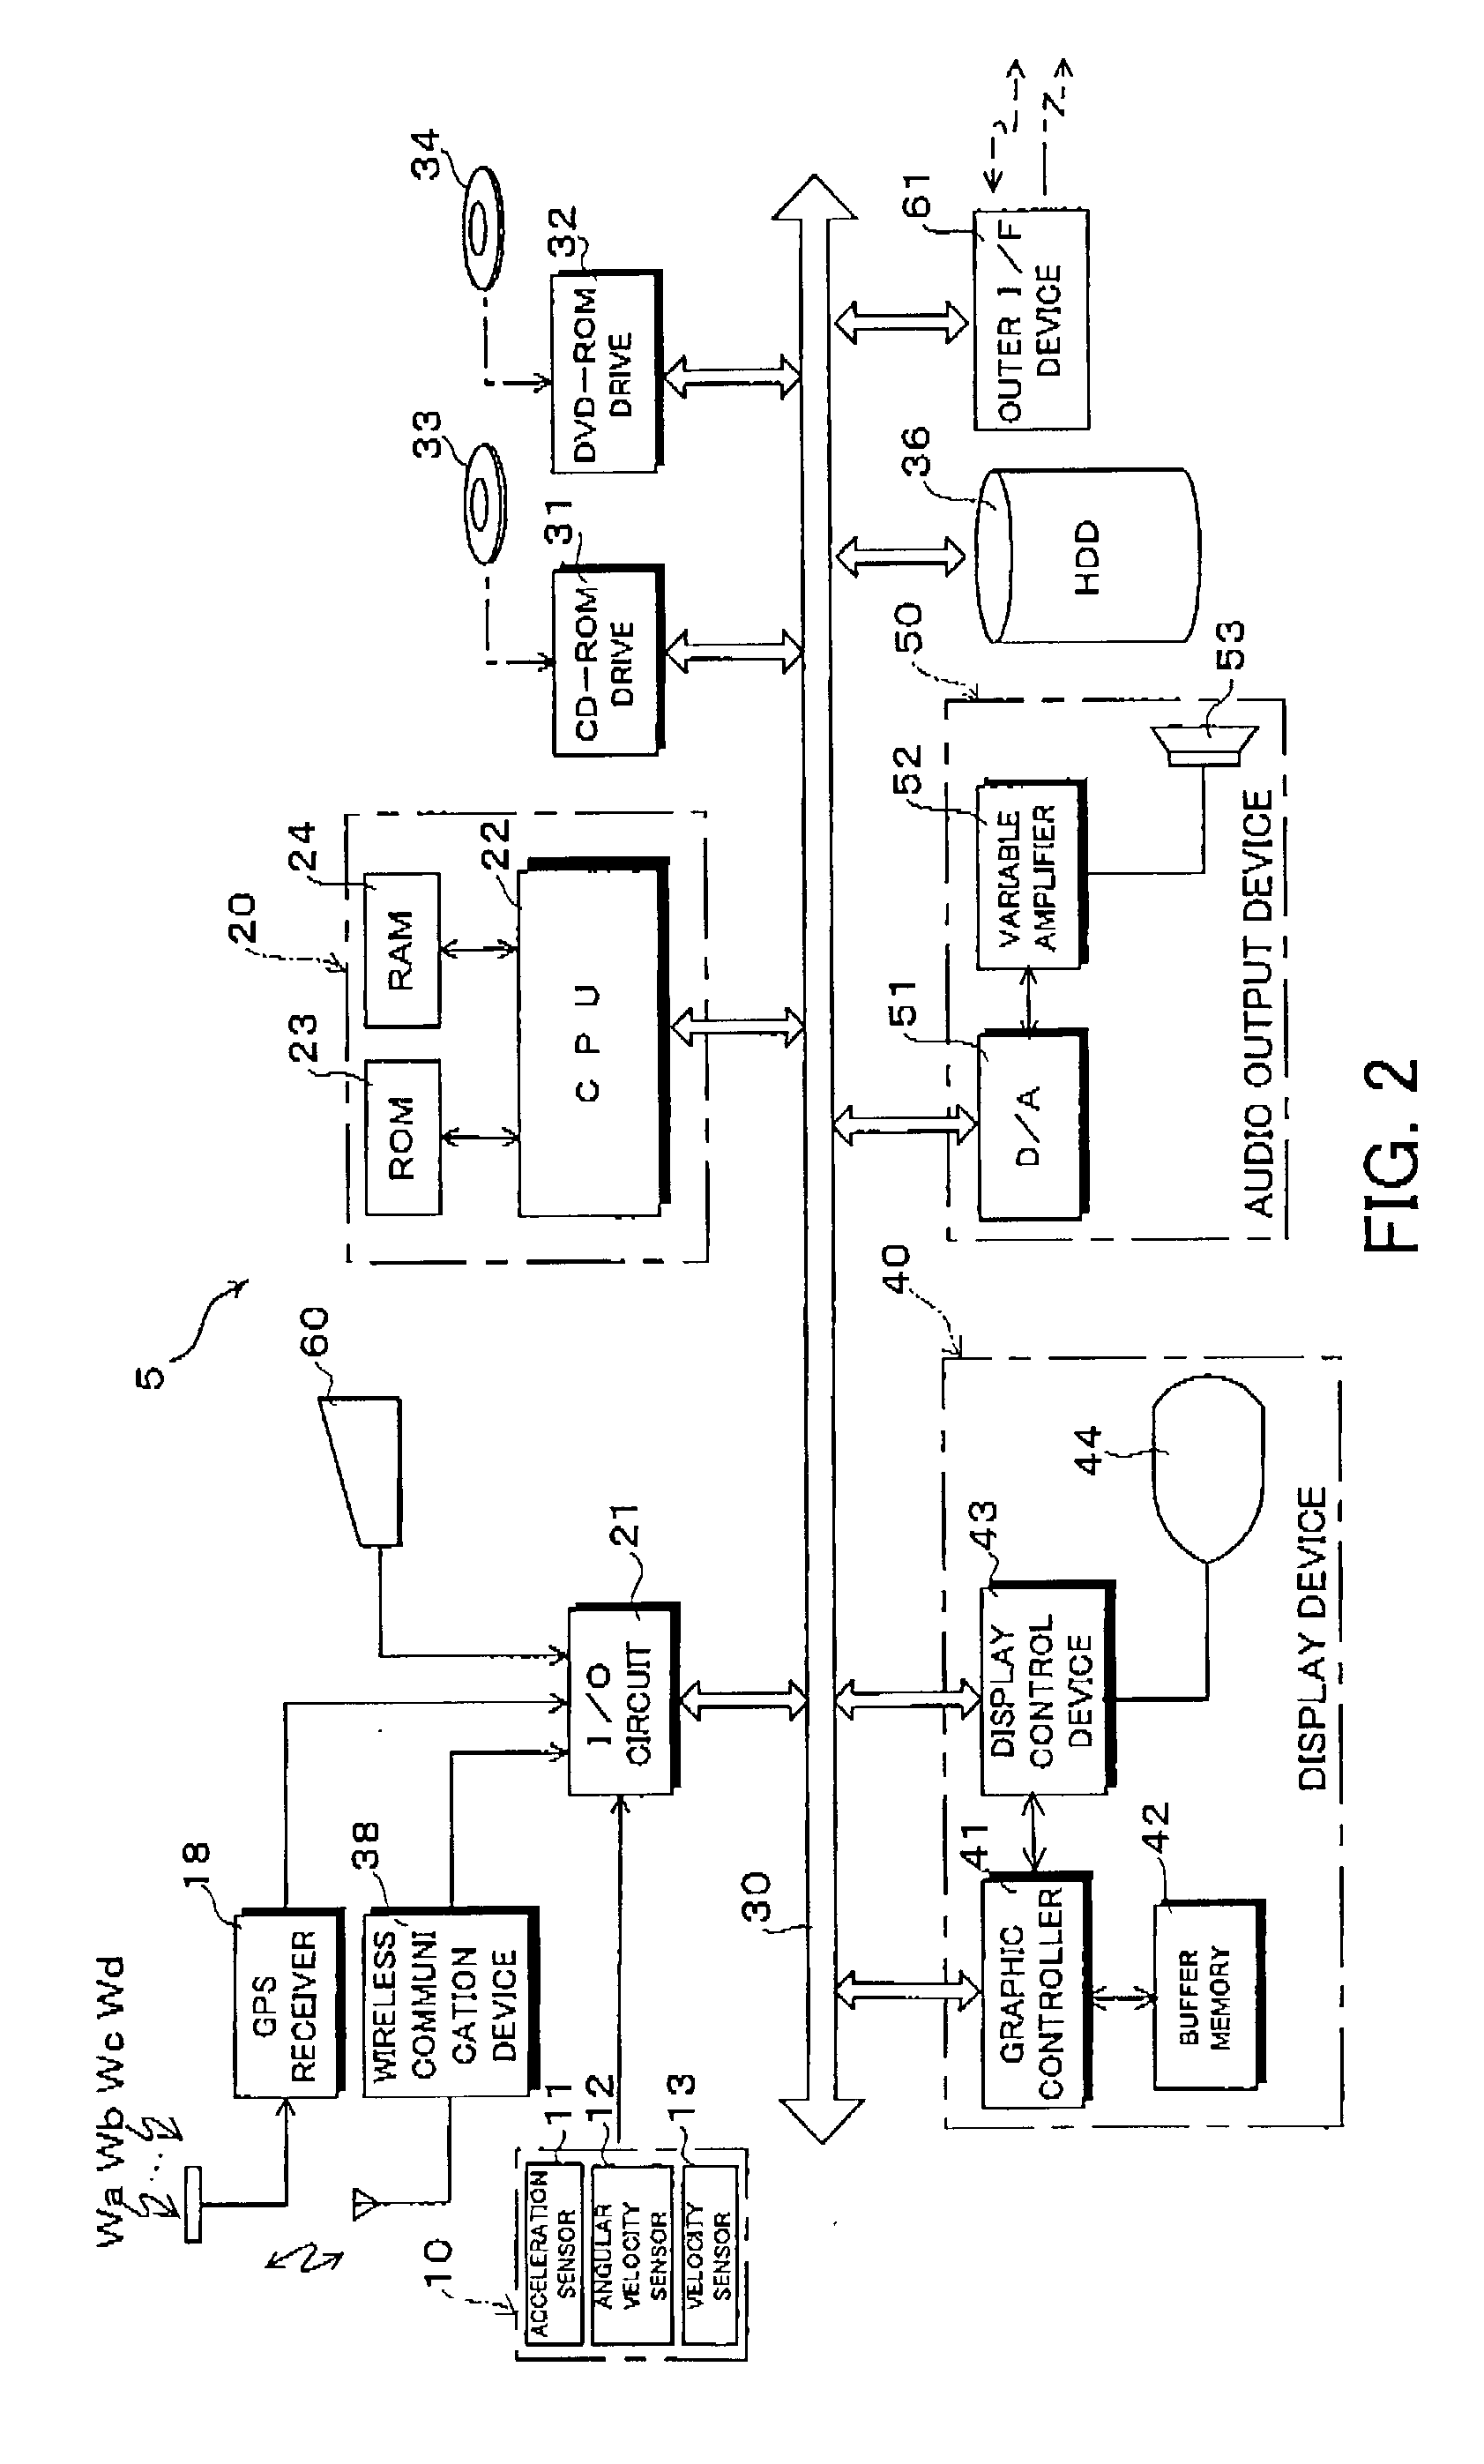 Communication navigation system and method, communication center apparatus, communication navigation terminal, program storage device and computer data signal embodied in carrier wave